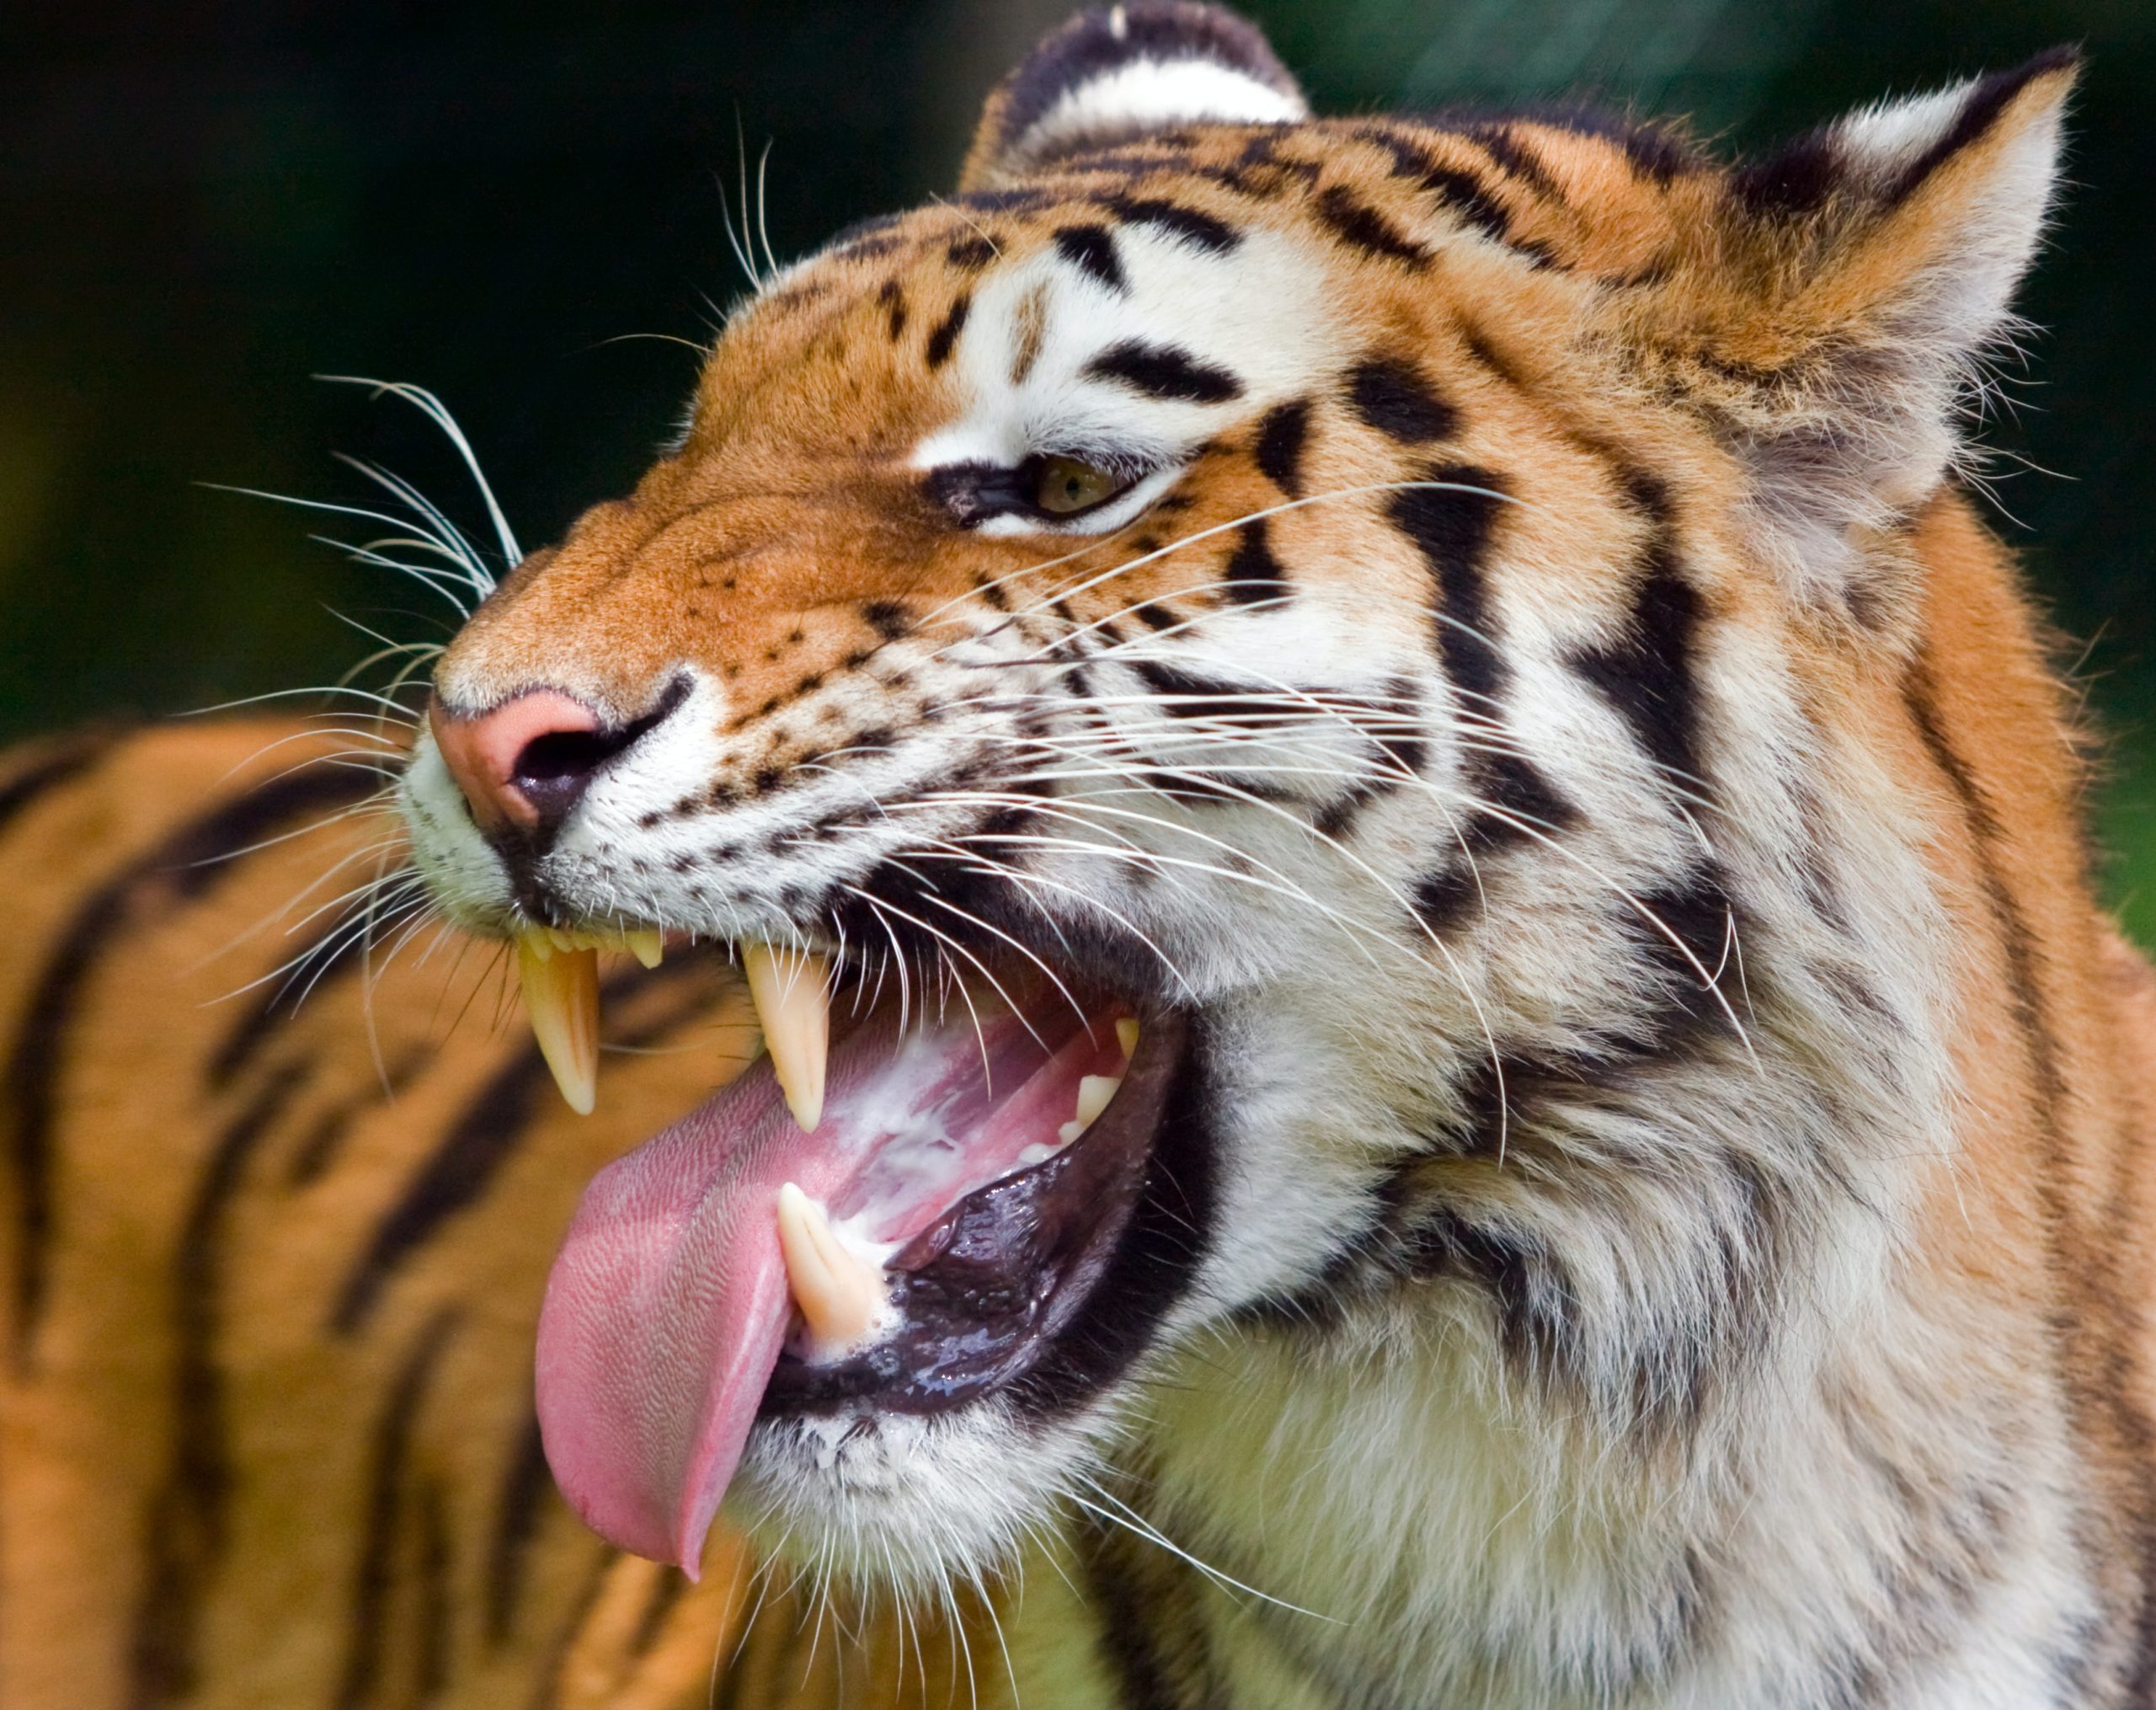 Tiger hissing with open mouth